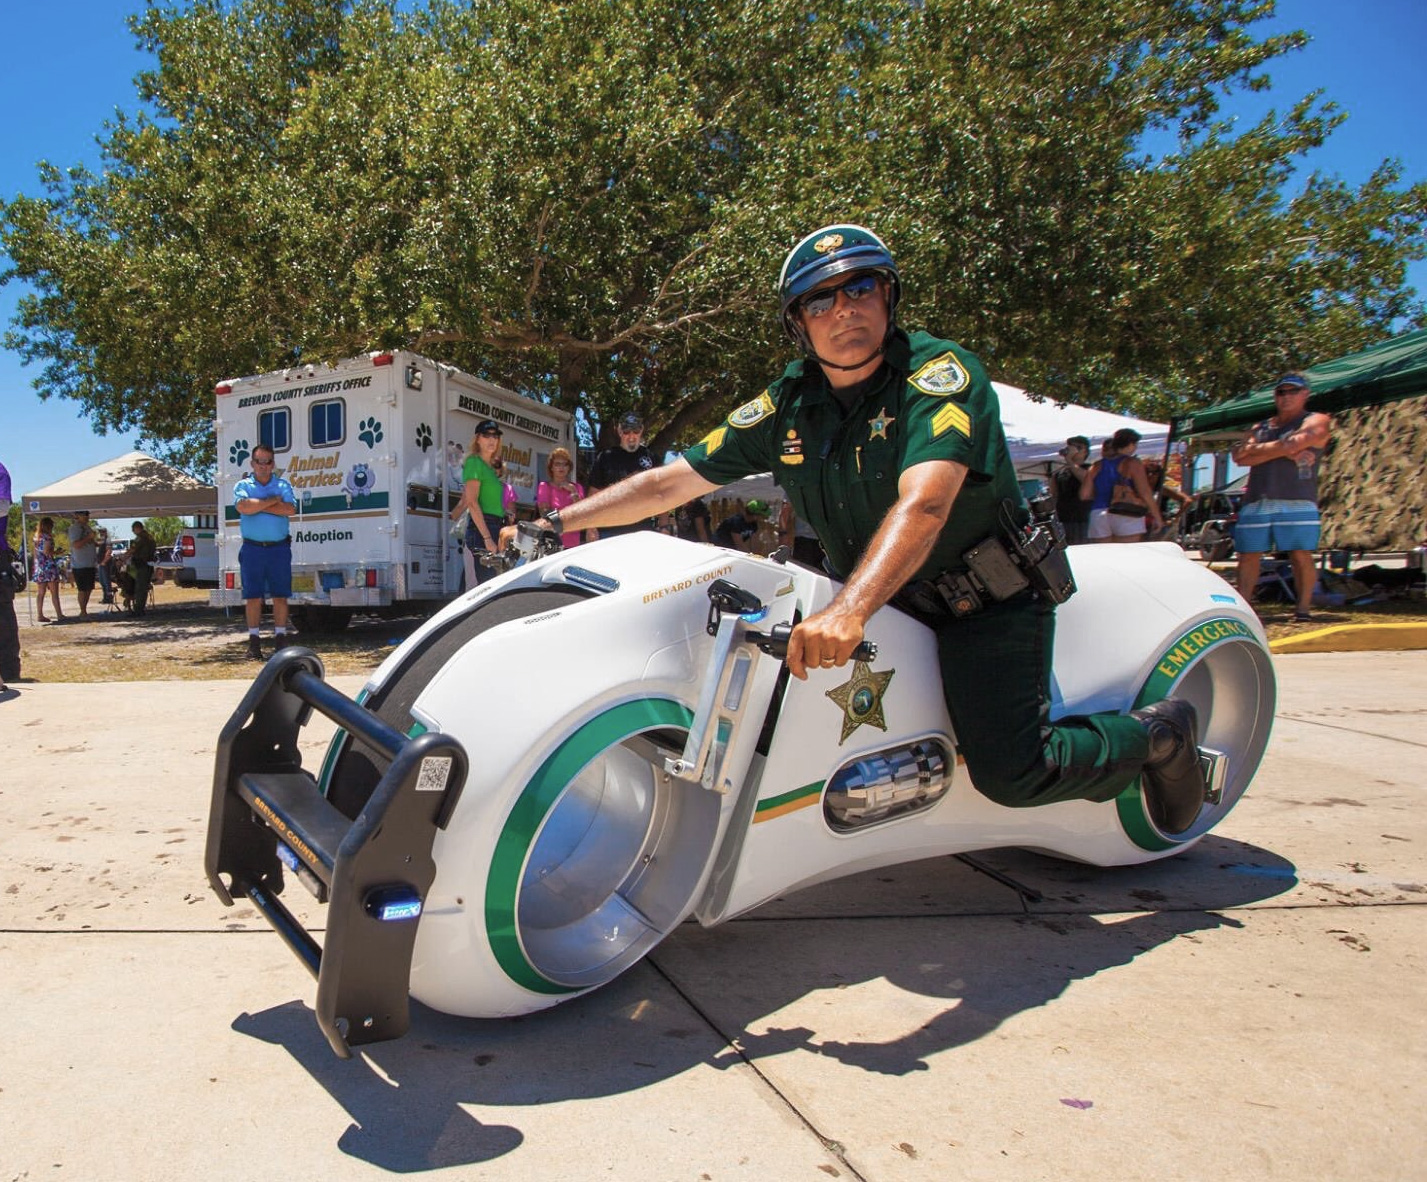 Parker Brothers Concepts 100mph futuristic motorbike donated to the Brevard County Sheriff's Office, Florida (Alex Schierholtz)